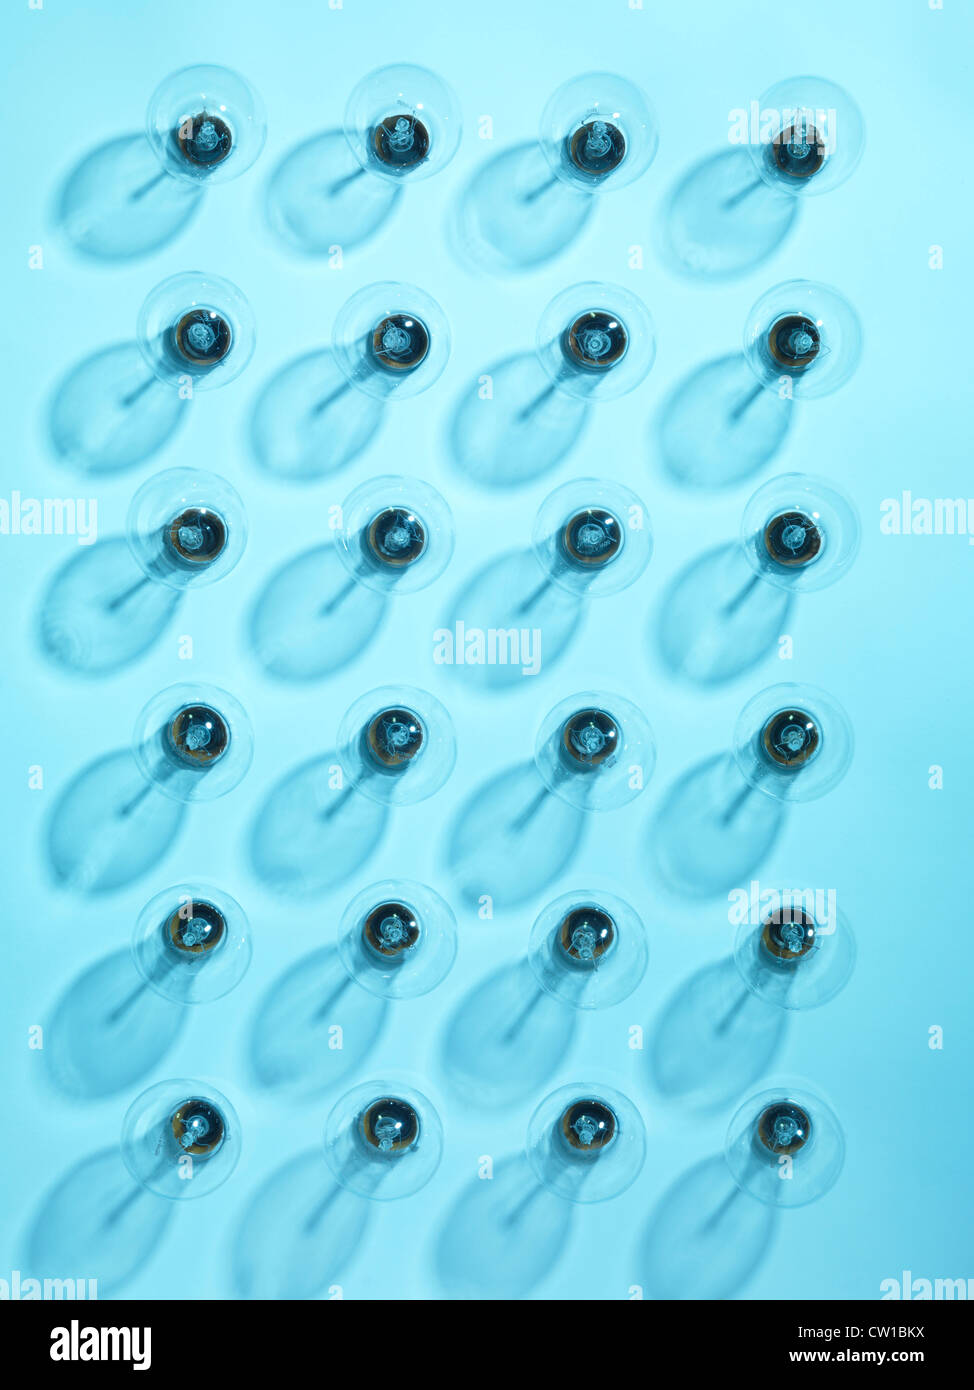 Group of turned off incandescent tungsten light bulbs on blue background Stock Photo